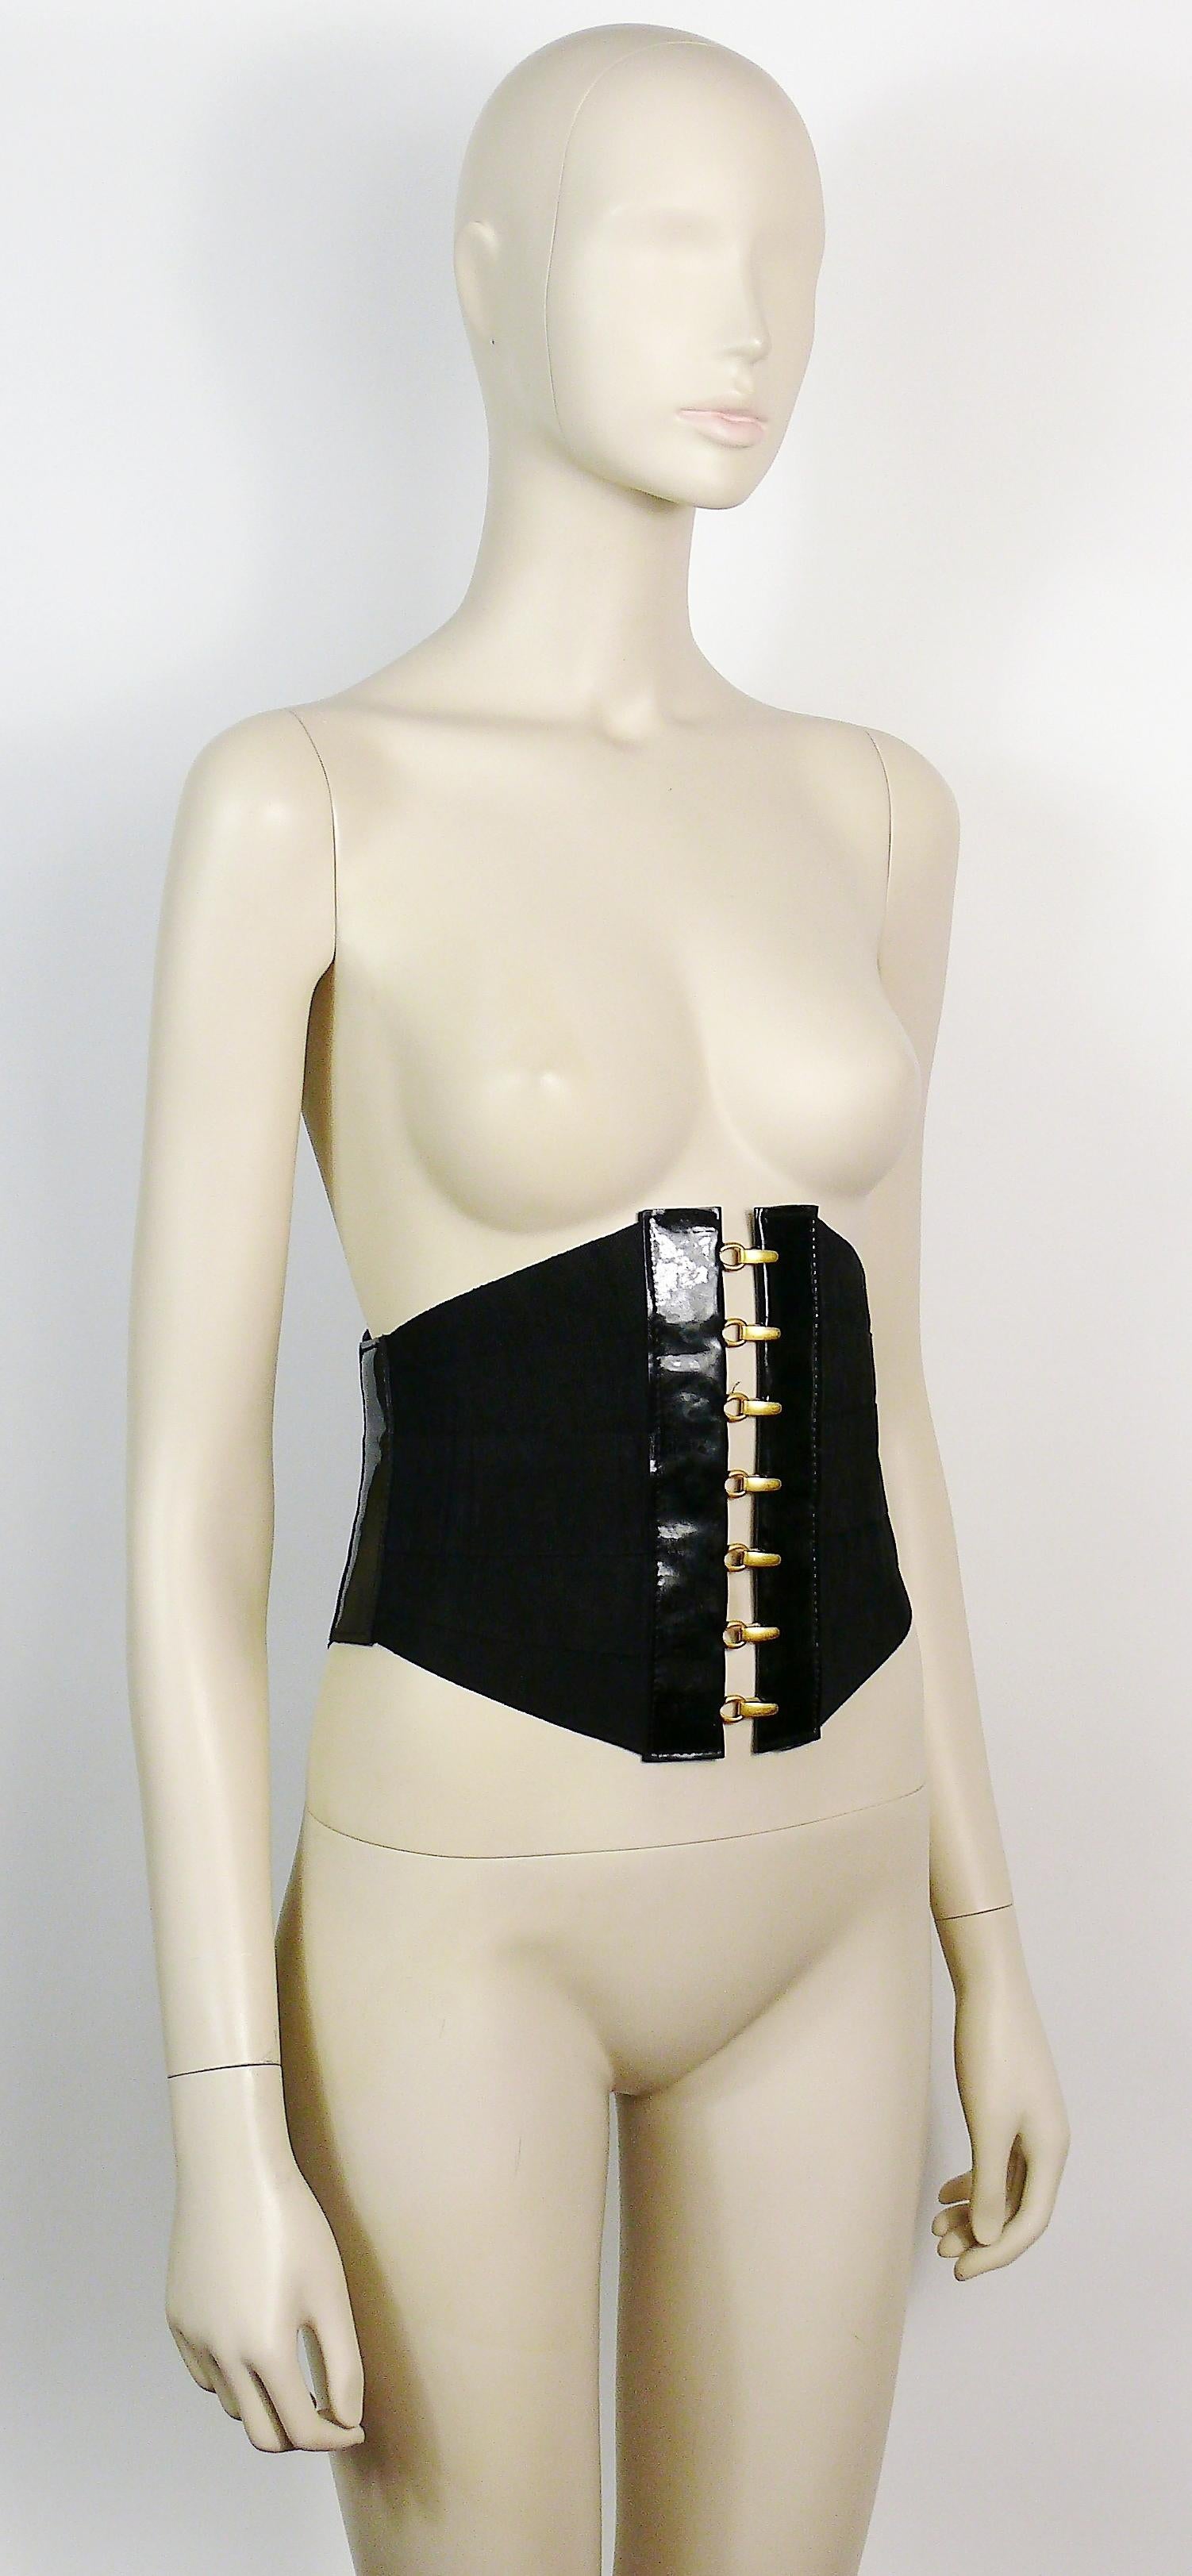 Vintage black bandage corset belt made of grosgrain straps, patent leather details and gold toned hardware.

Hook and eye front closure.
Laces on back.
Piercing ring detail on left side.

No indicated size.

Un-marked.

Indicative measurements :